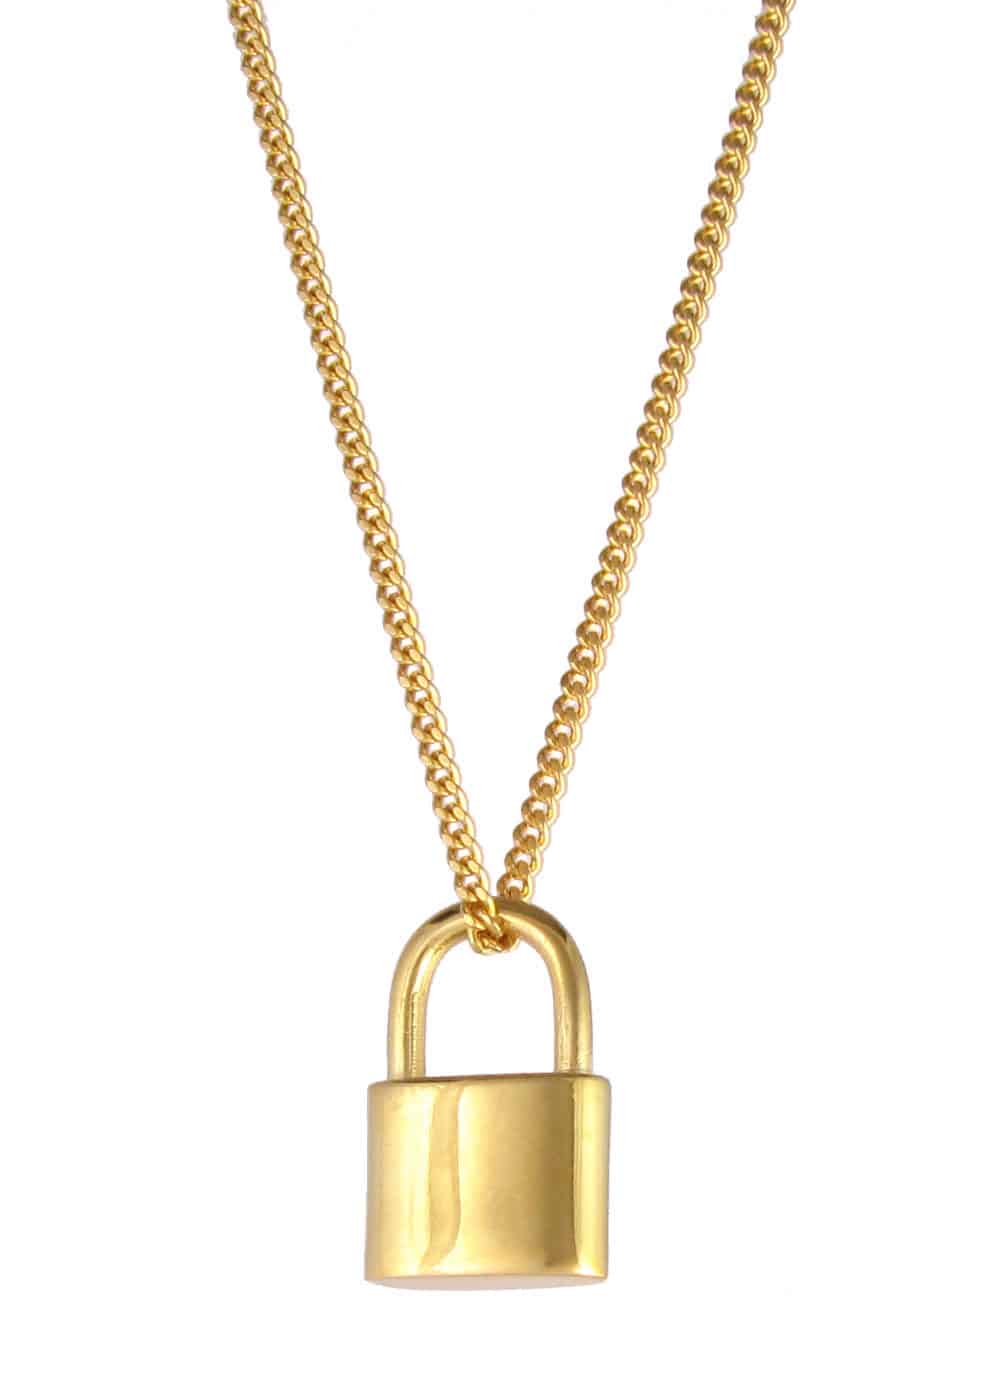 Small Padlock Necklace Gold Vermeil | Sterling Silver & Gold Vermeil Jewellery | Unisex jewellery